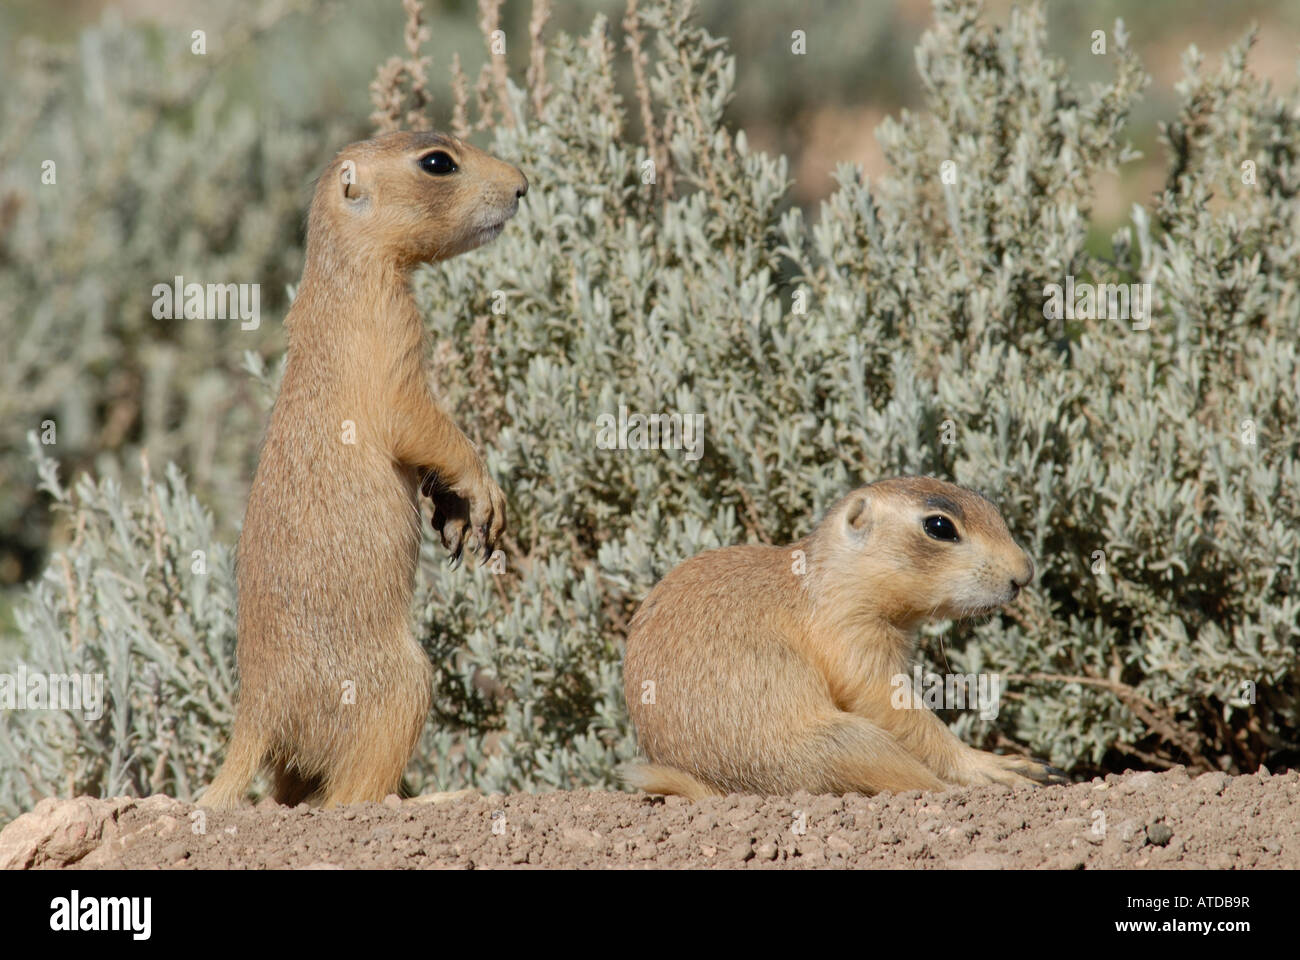 Stock photo of two young Utah prairie dogs sitting together. Stock Photo